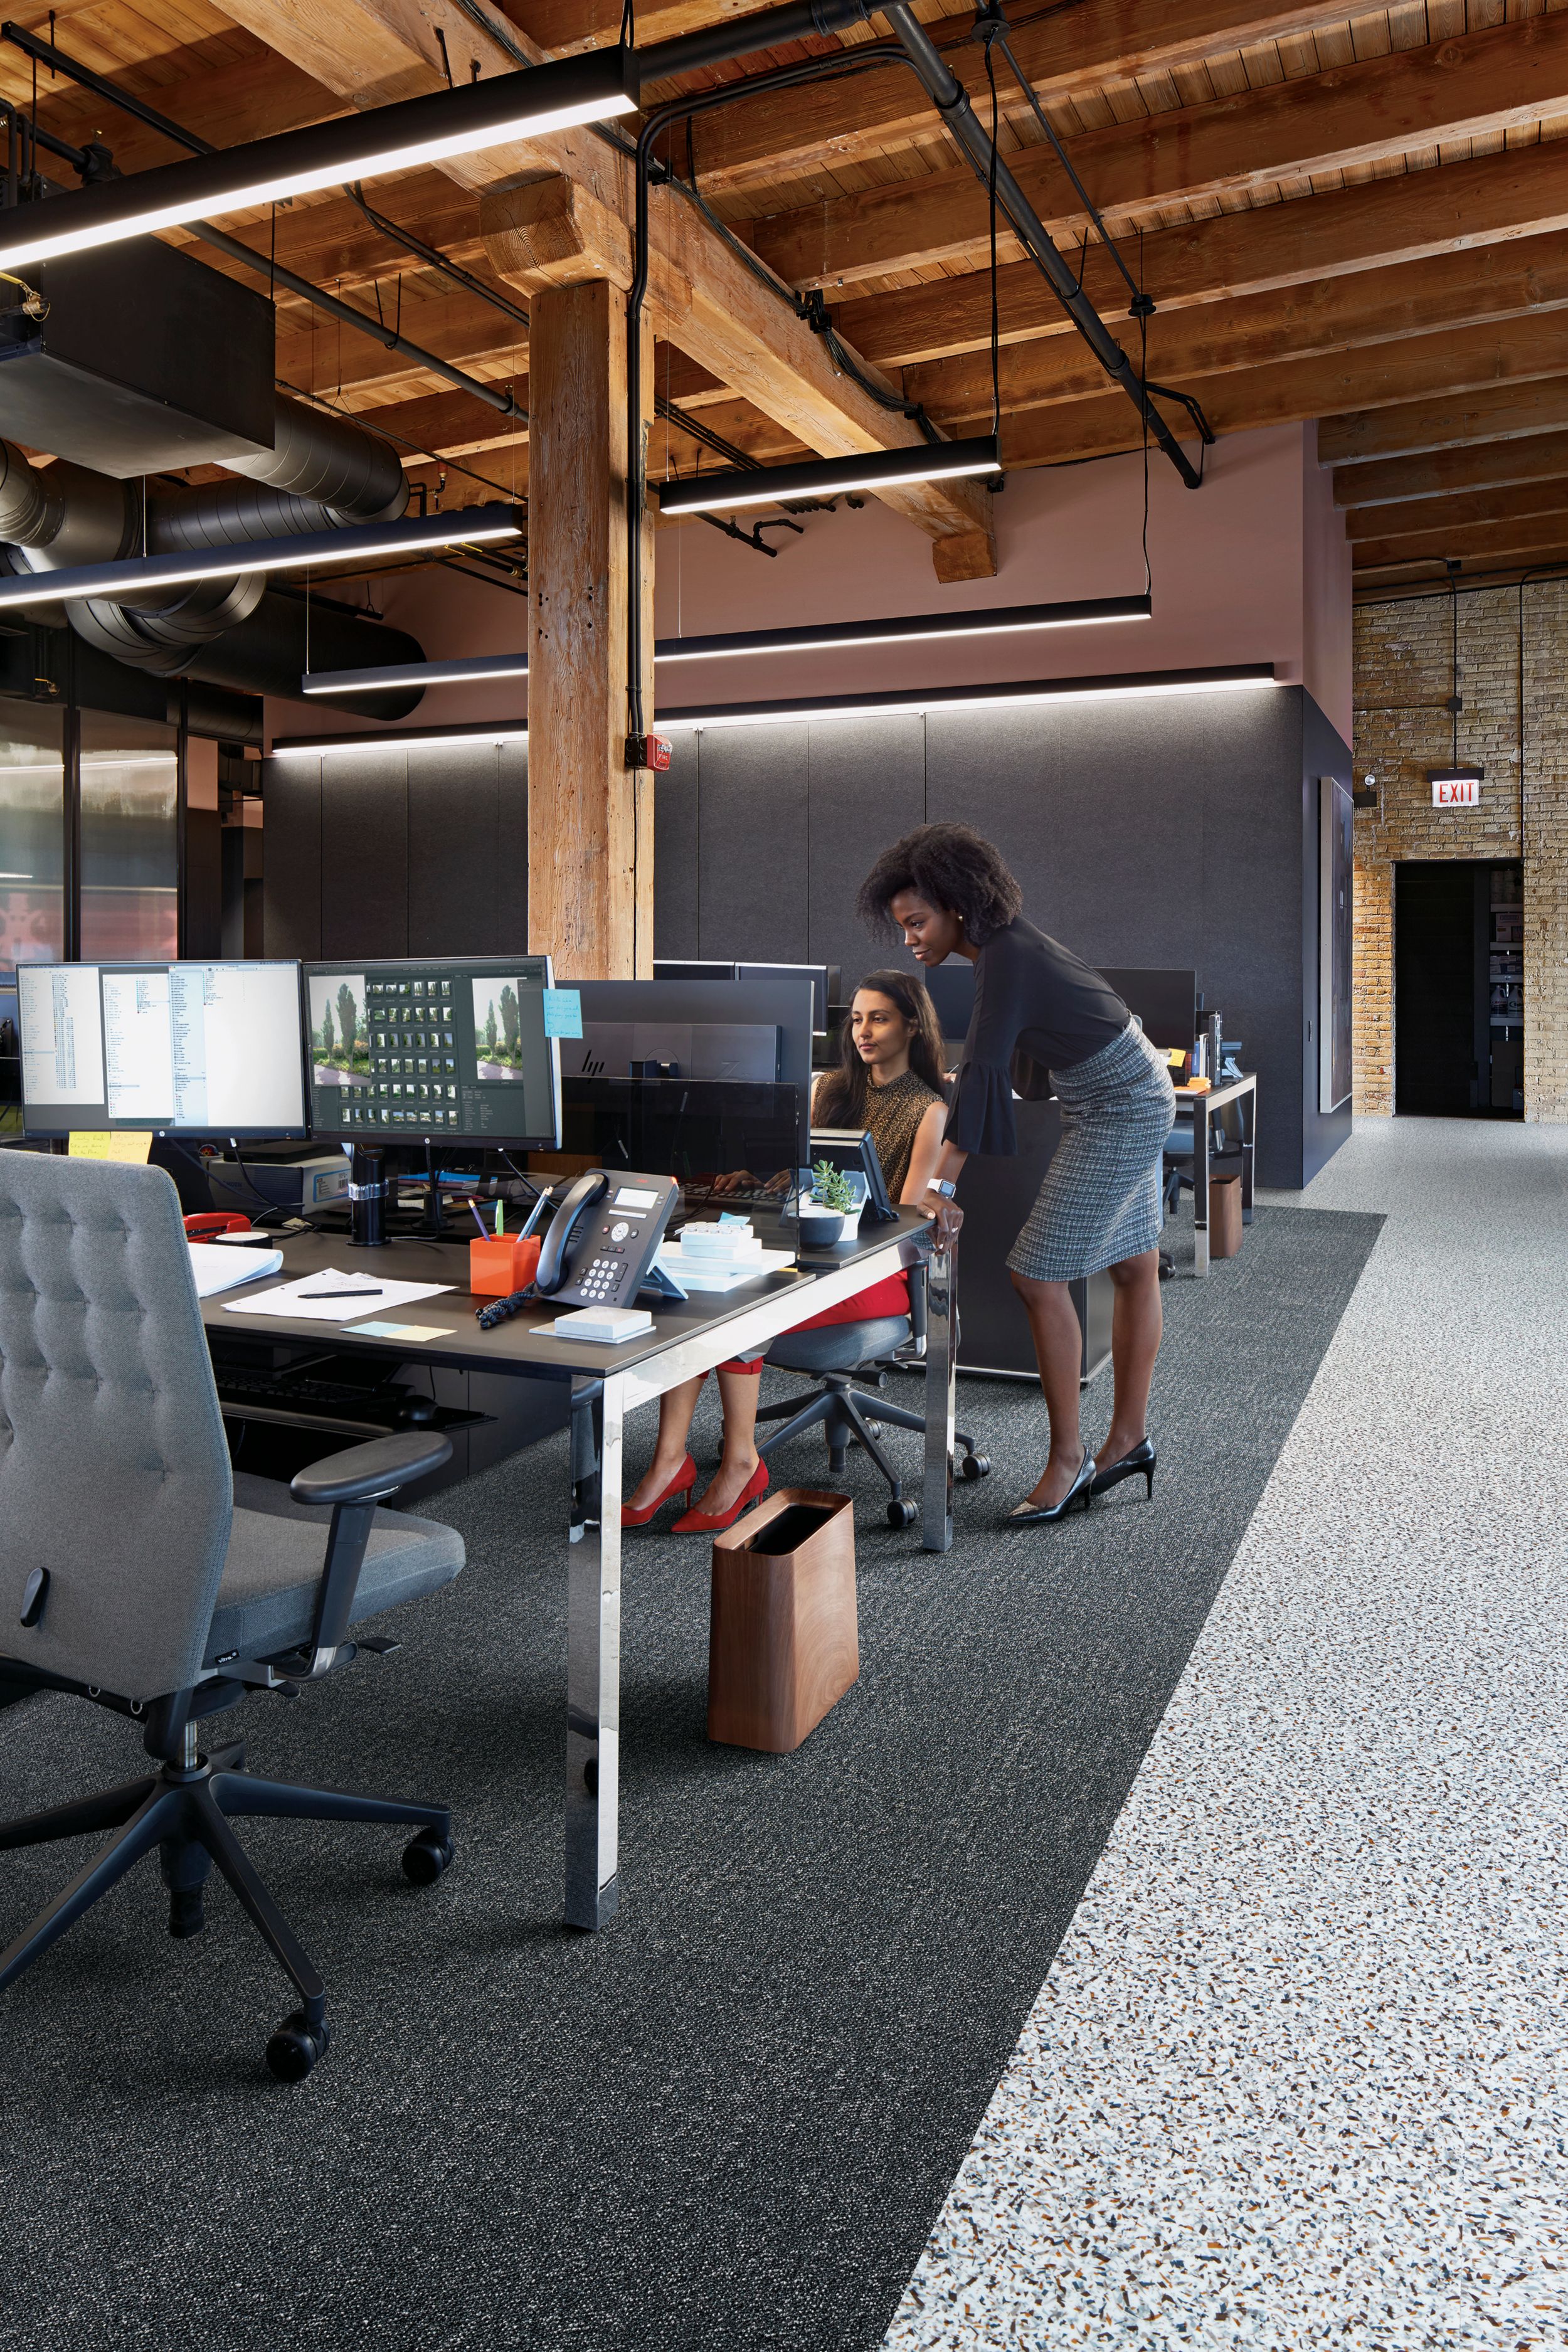 Interface Step it Up and Walk on By carpet tile in common work space with two people numéro d’image 4